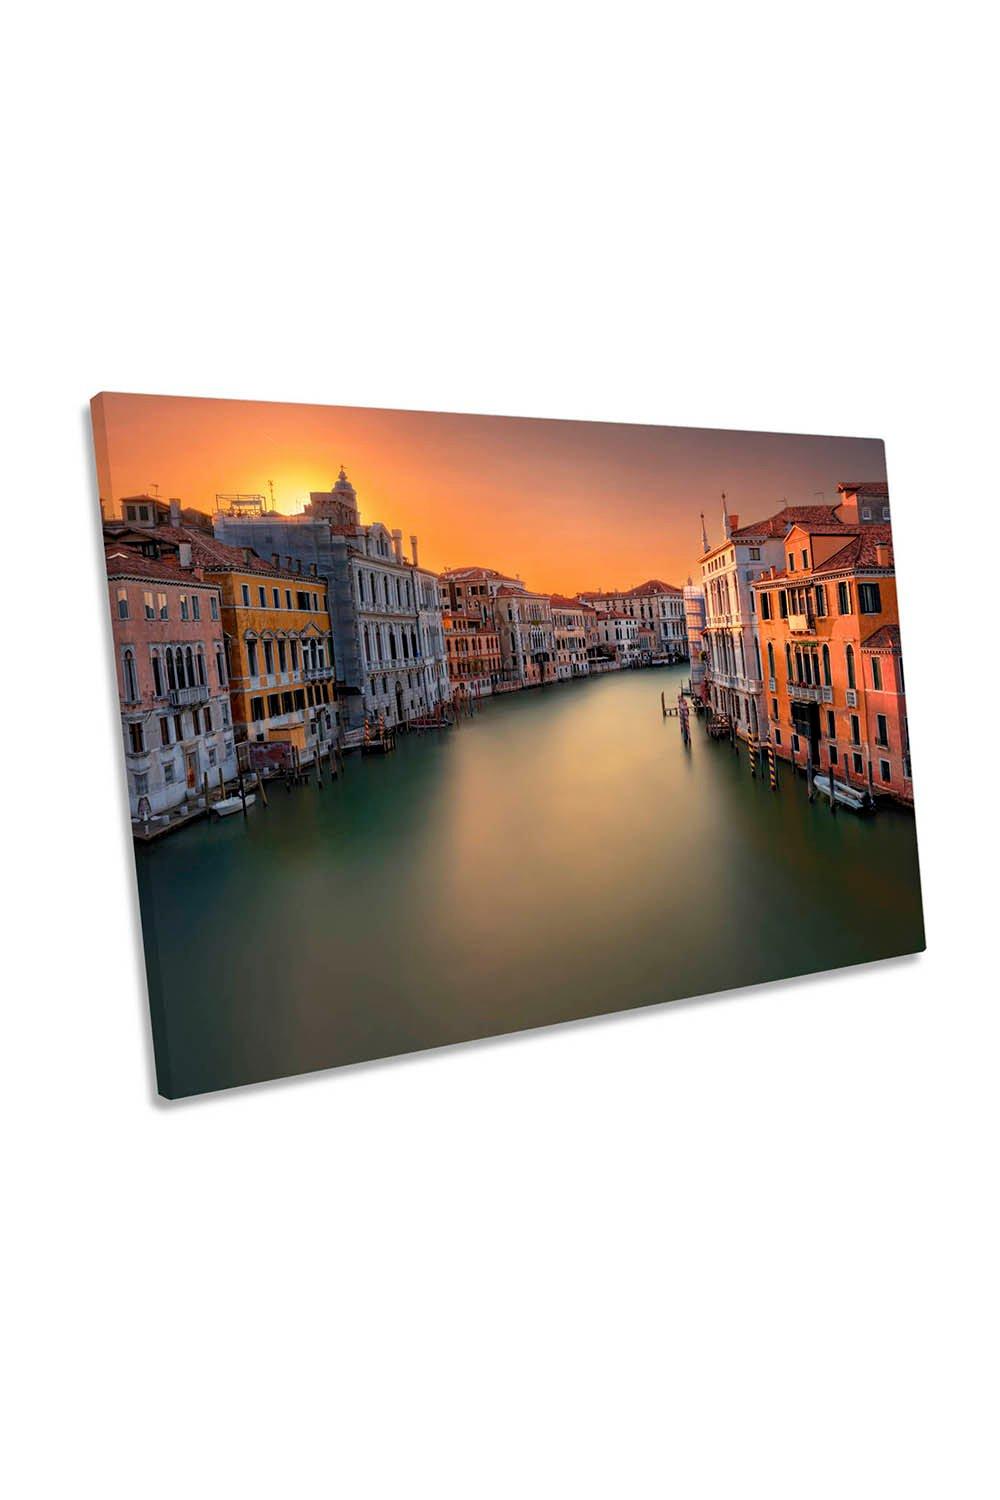 Sunset in Venice Italy Canal City Canvas Wall Art Picture Print